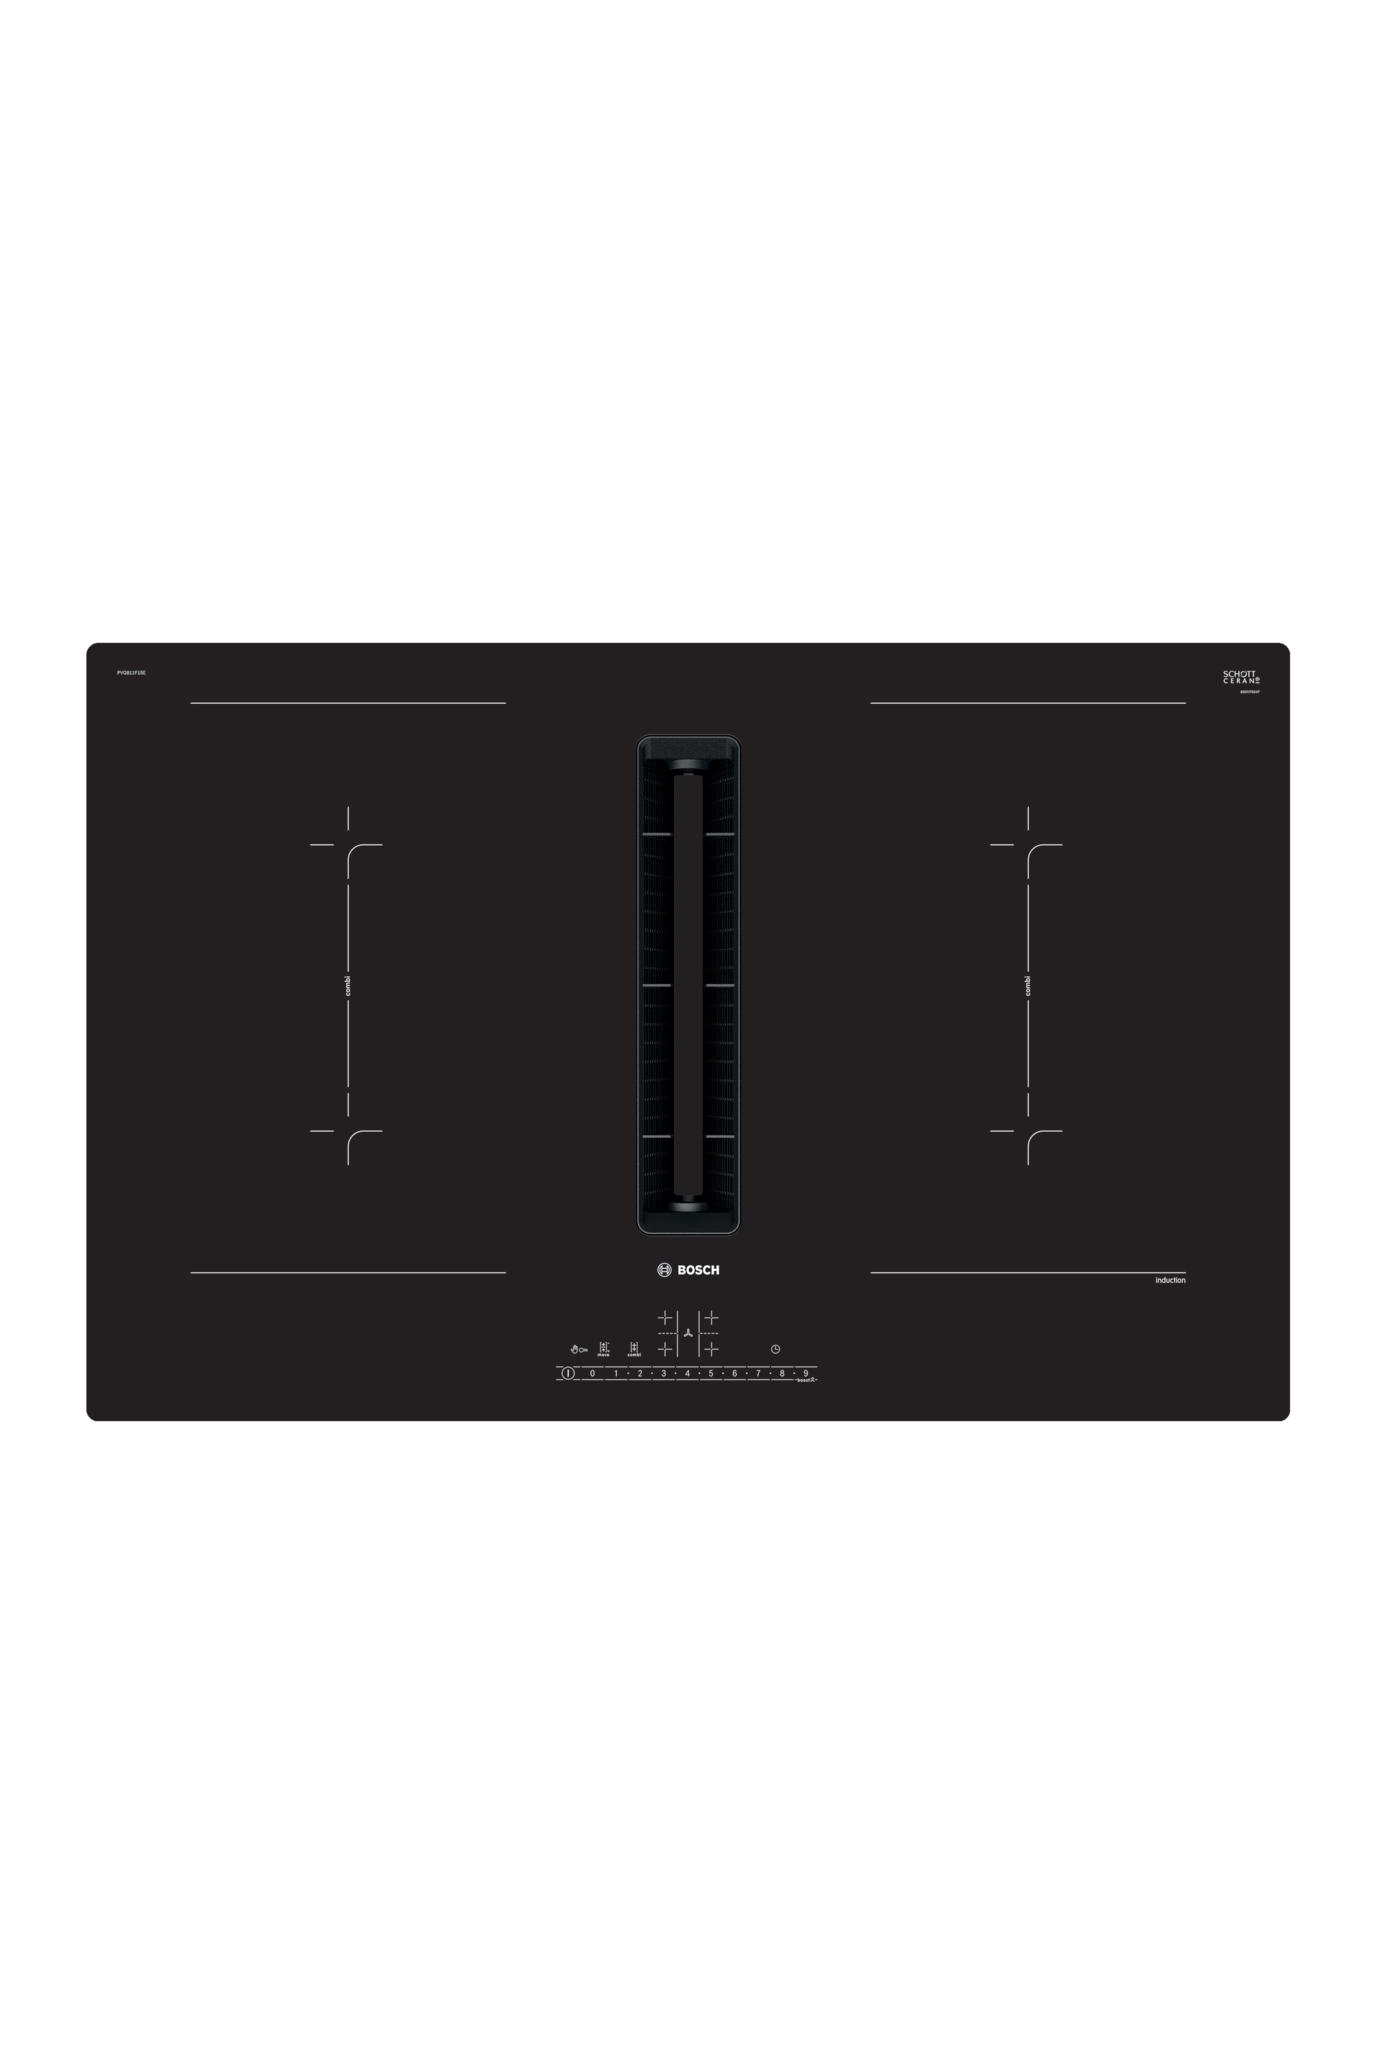 Bosch Series 6 cooktop with integrated ventilation